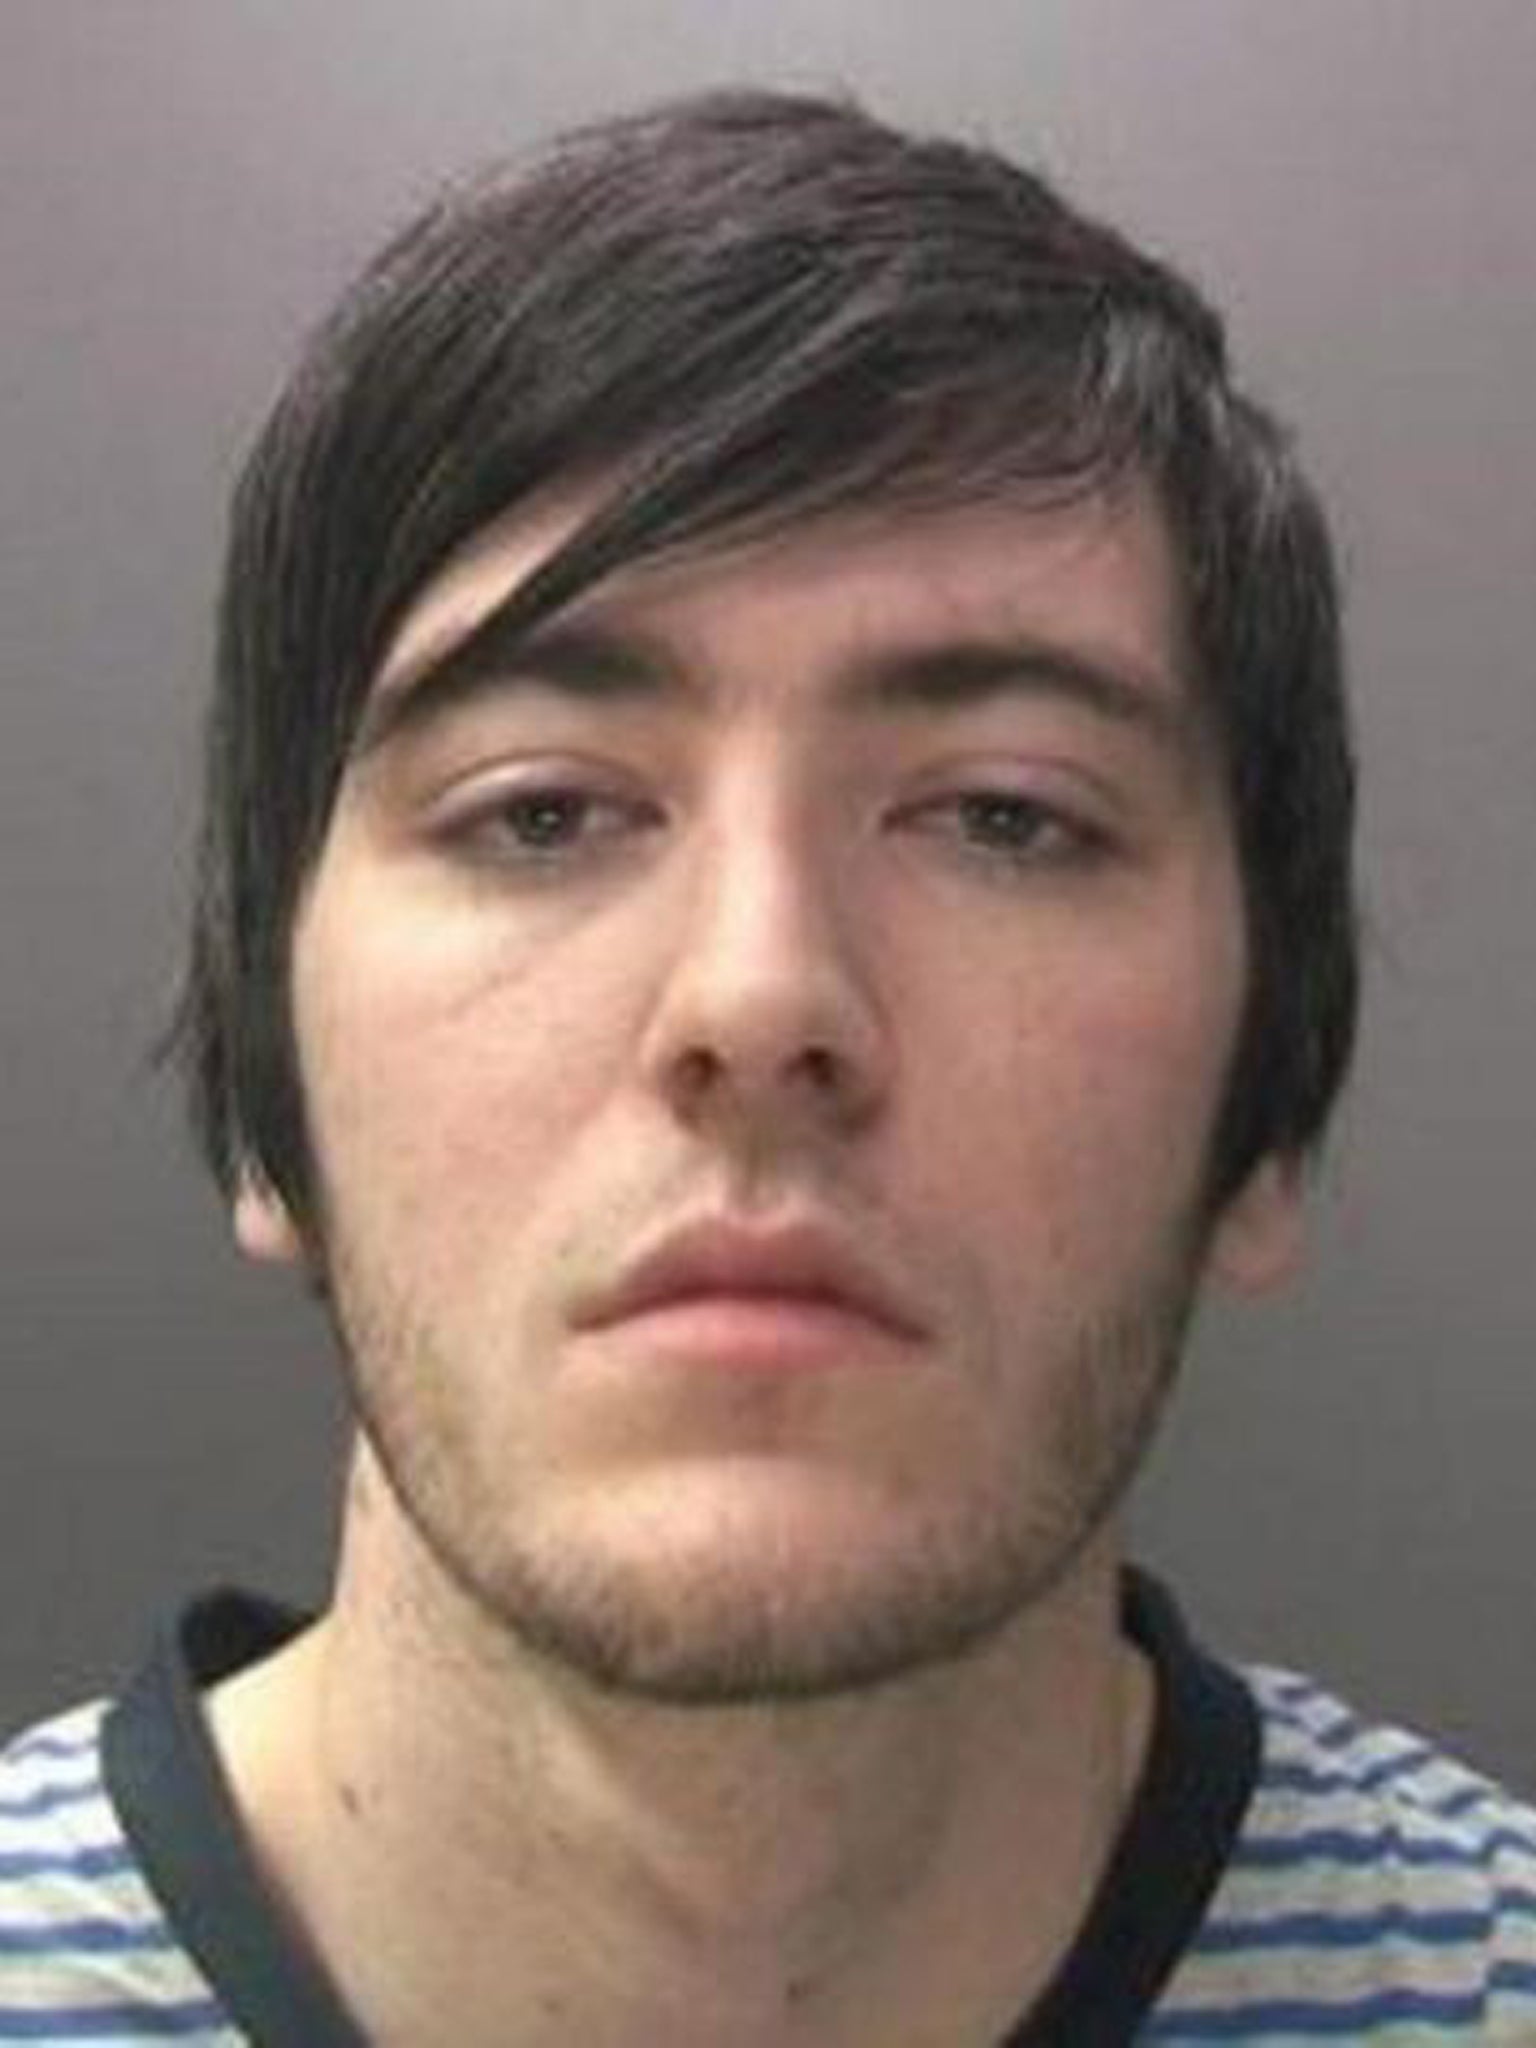 Paul Wilson was jailed for life in 2011 after using a mobile phone to film two separate attacks on an infant